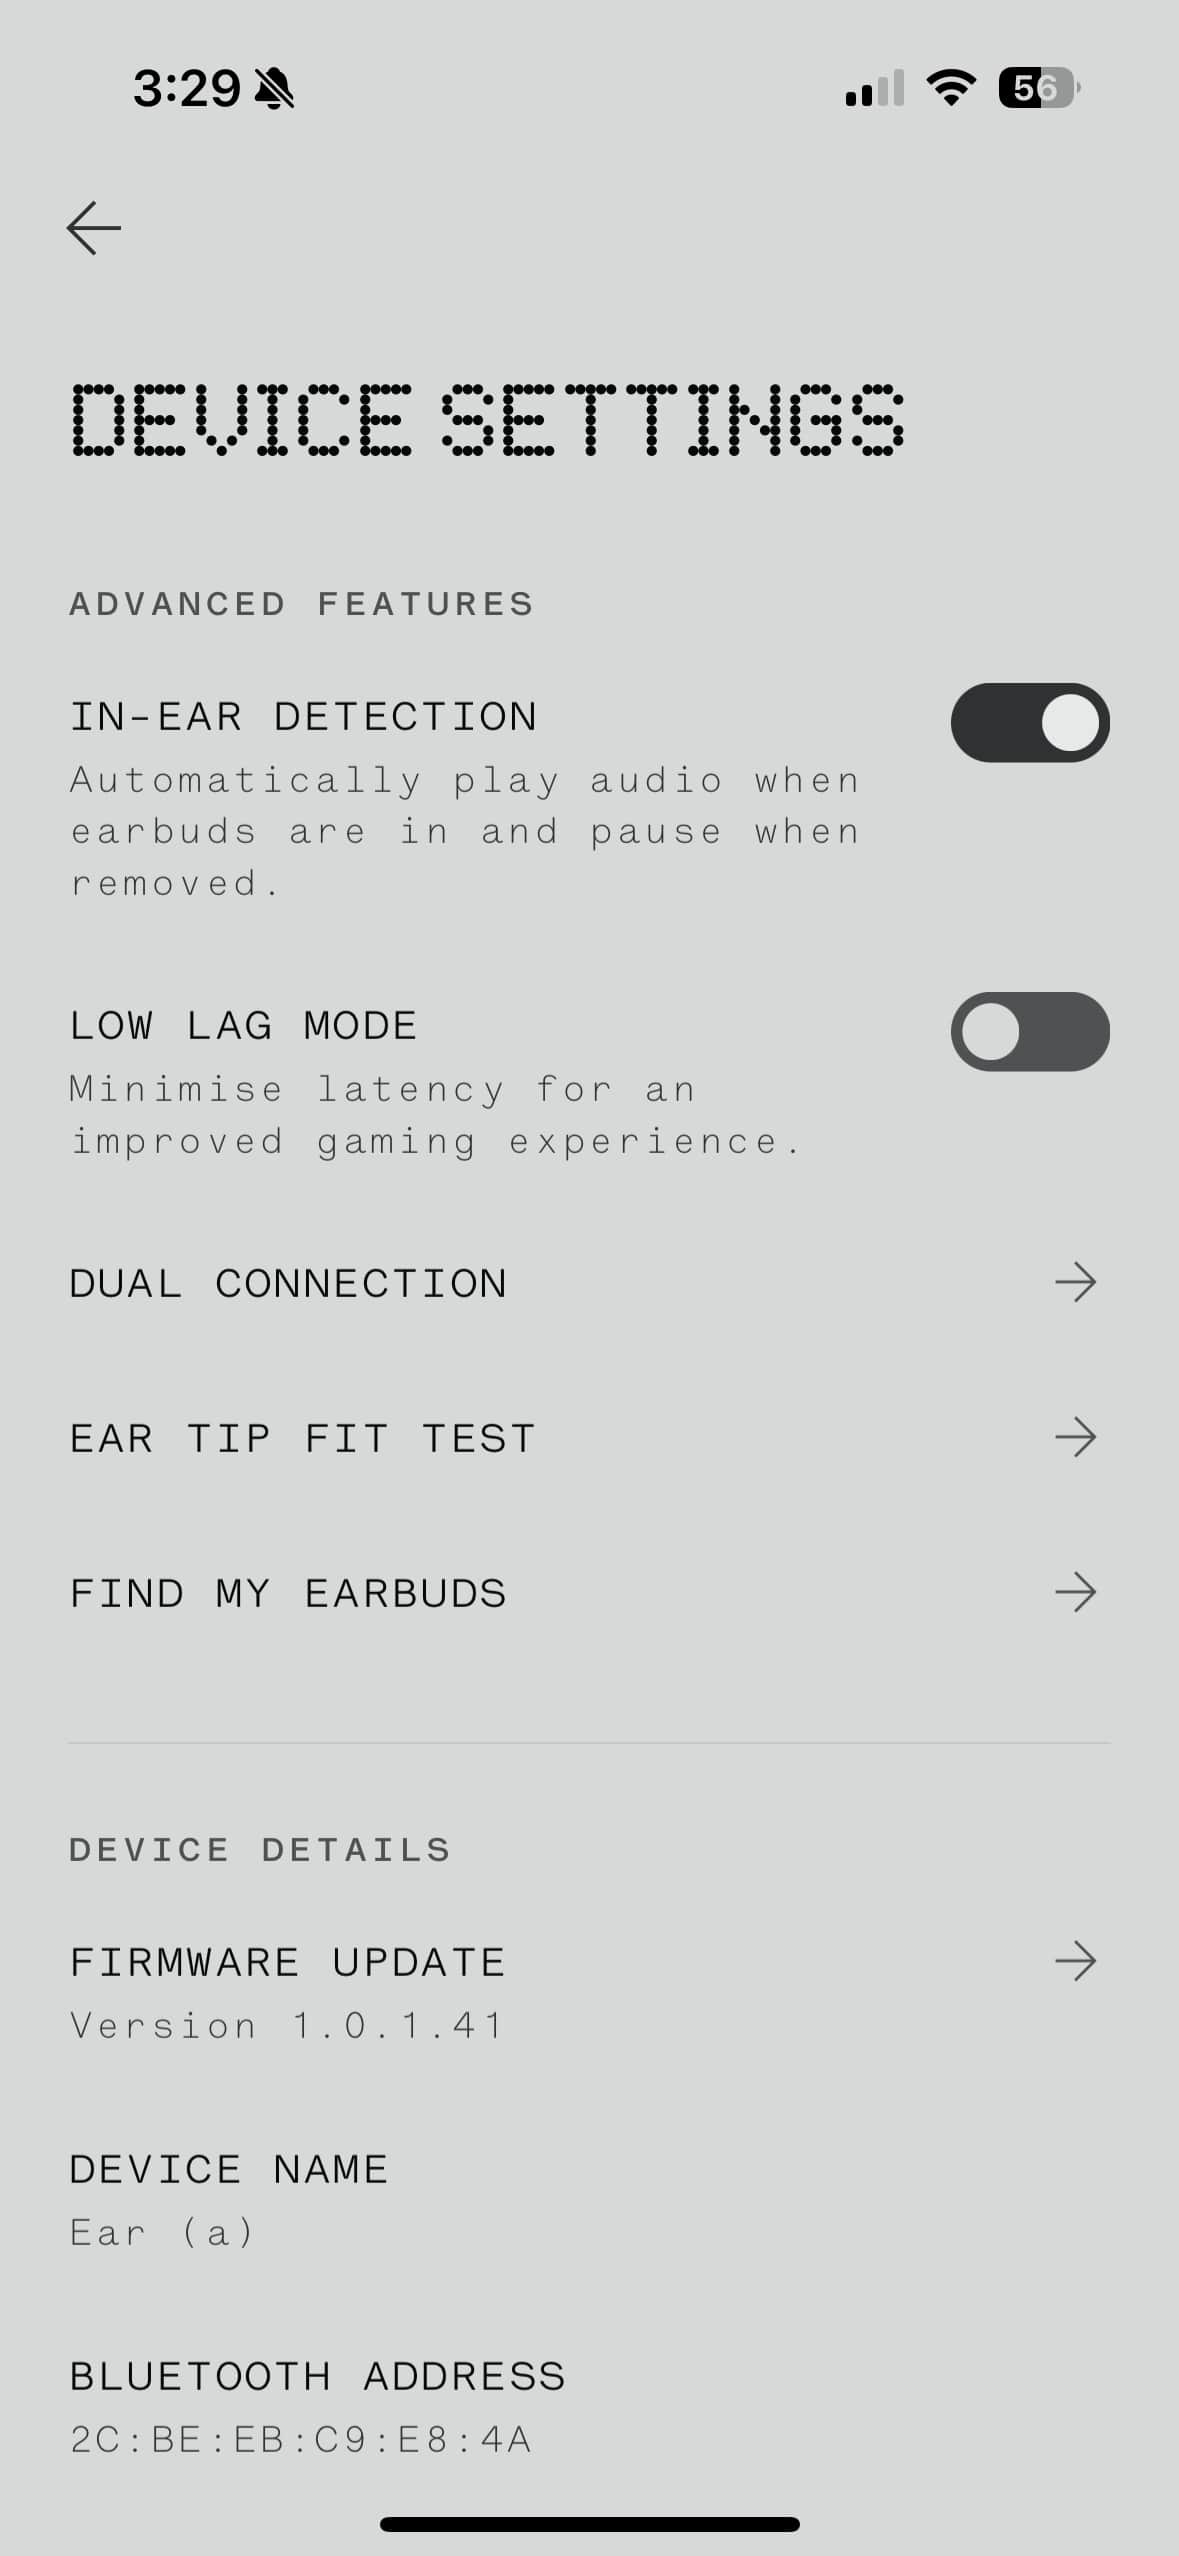 Nothing X app settings for the Nothing Ear (a).